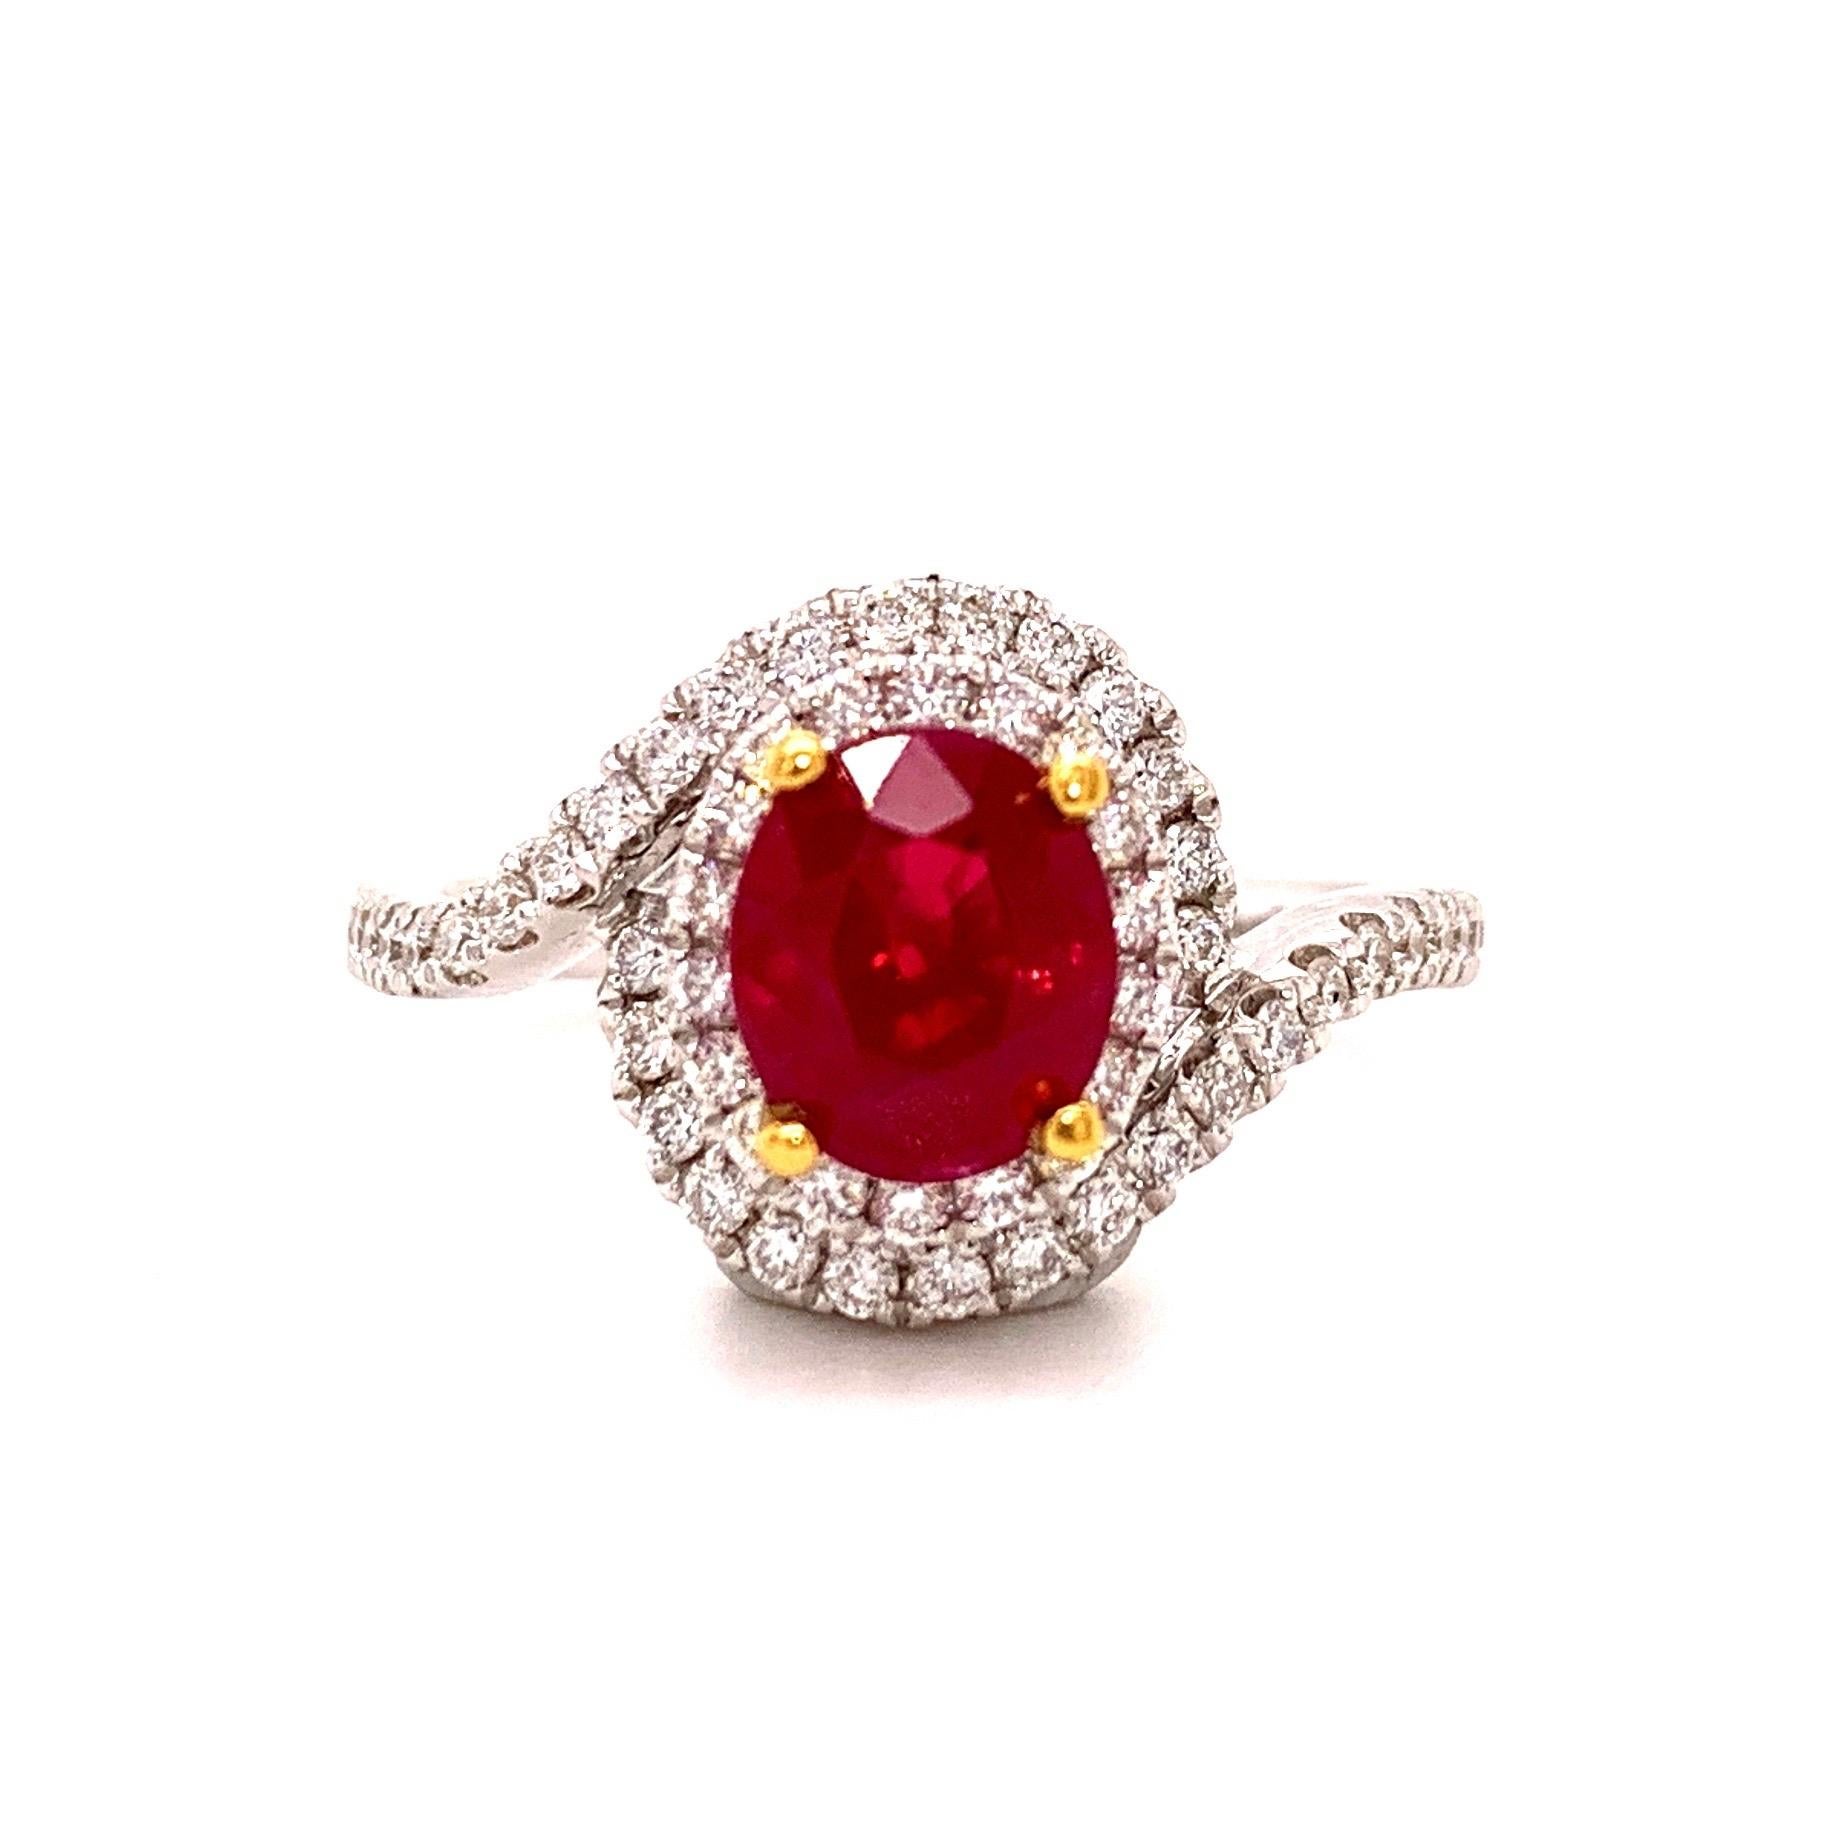 Stunning Burma ruby diamond ring. High lustre, red sparkling, oval faceted, 1.59 carats natural ruby mounted in an open basket with four bead prongs, accented with two rows of round brilliant cut diamonds. Beautiful handcrafted design set in 18